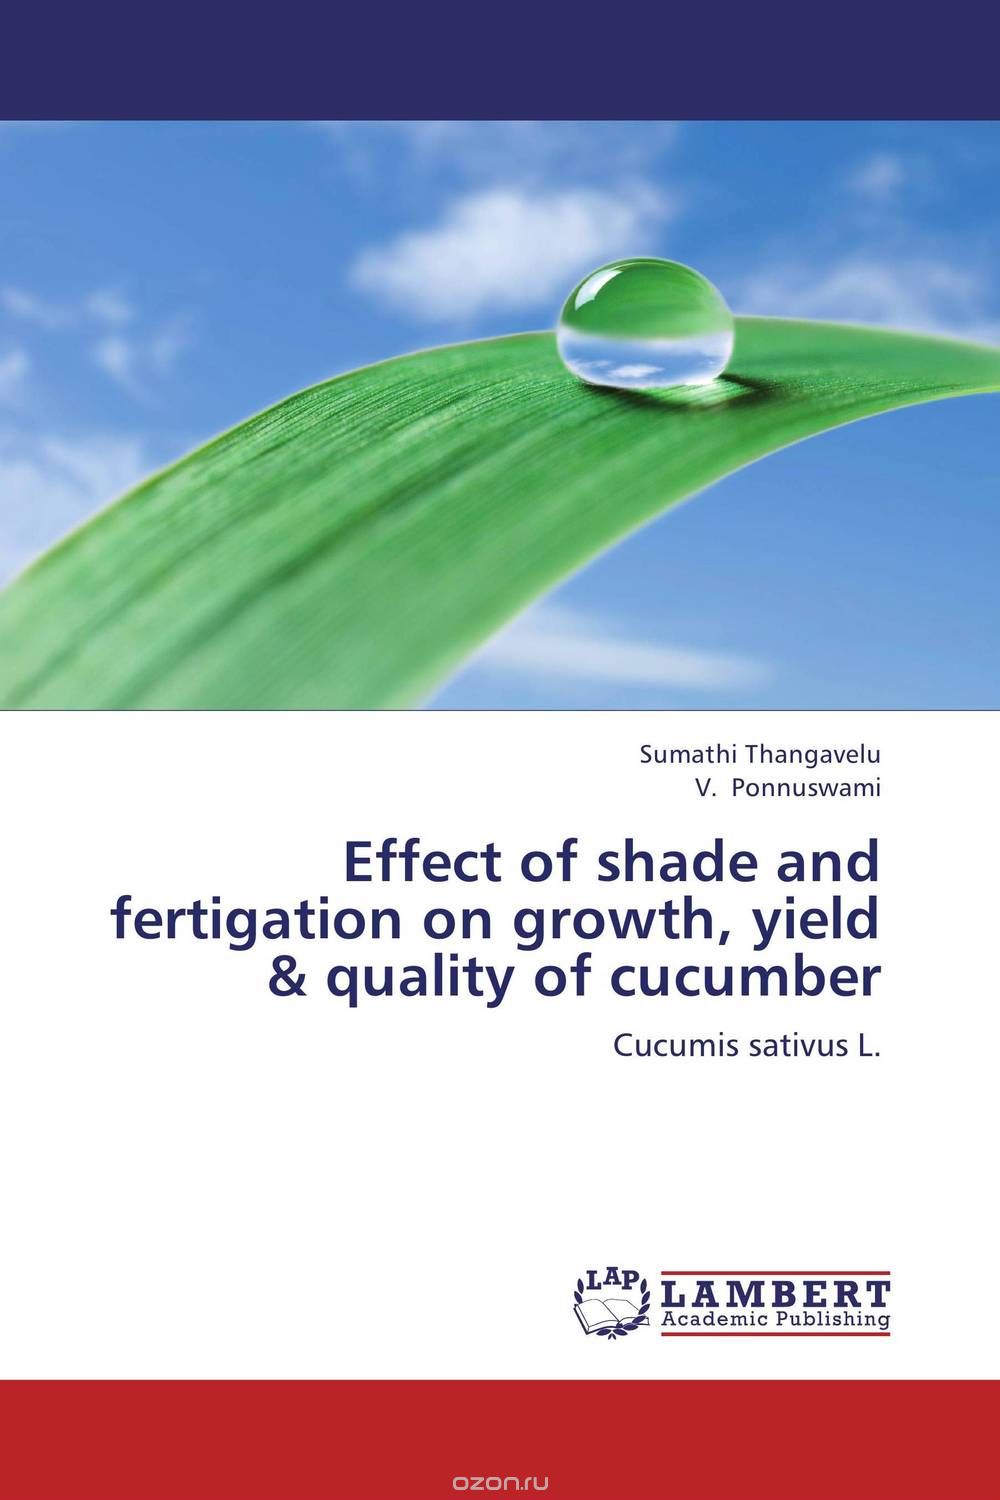 Effect of shade and fertigation on growth, yield & quality of cucumber